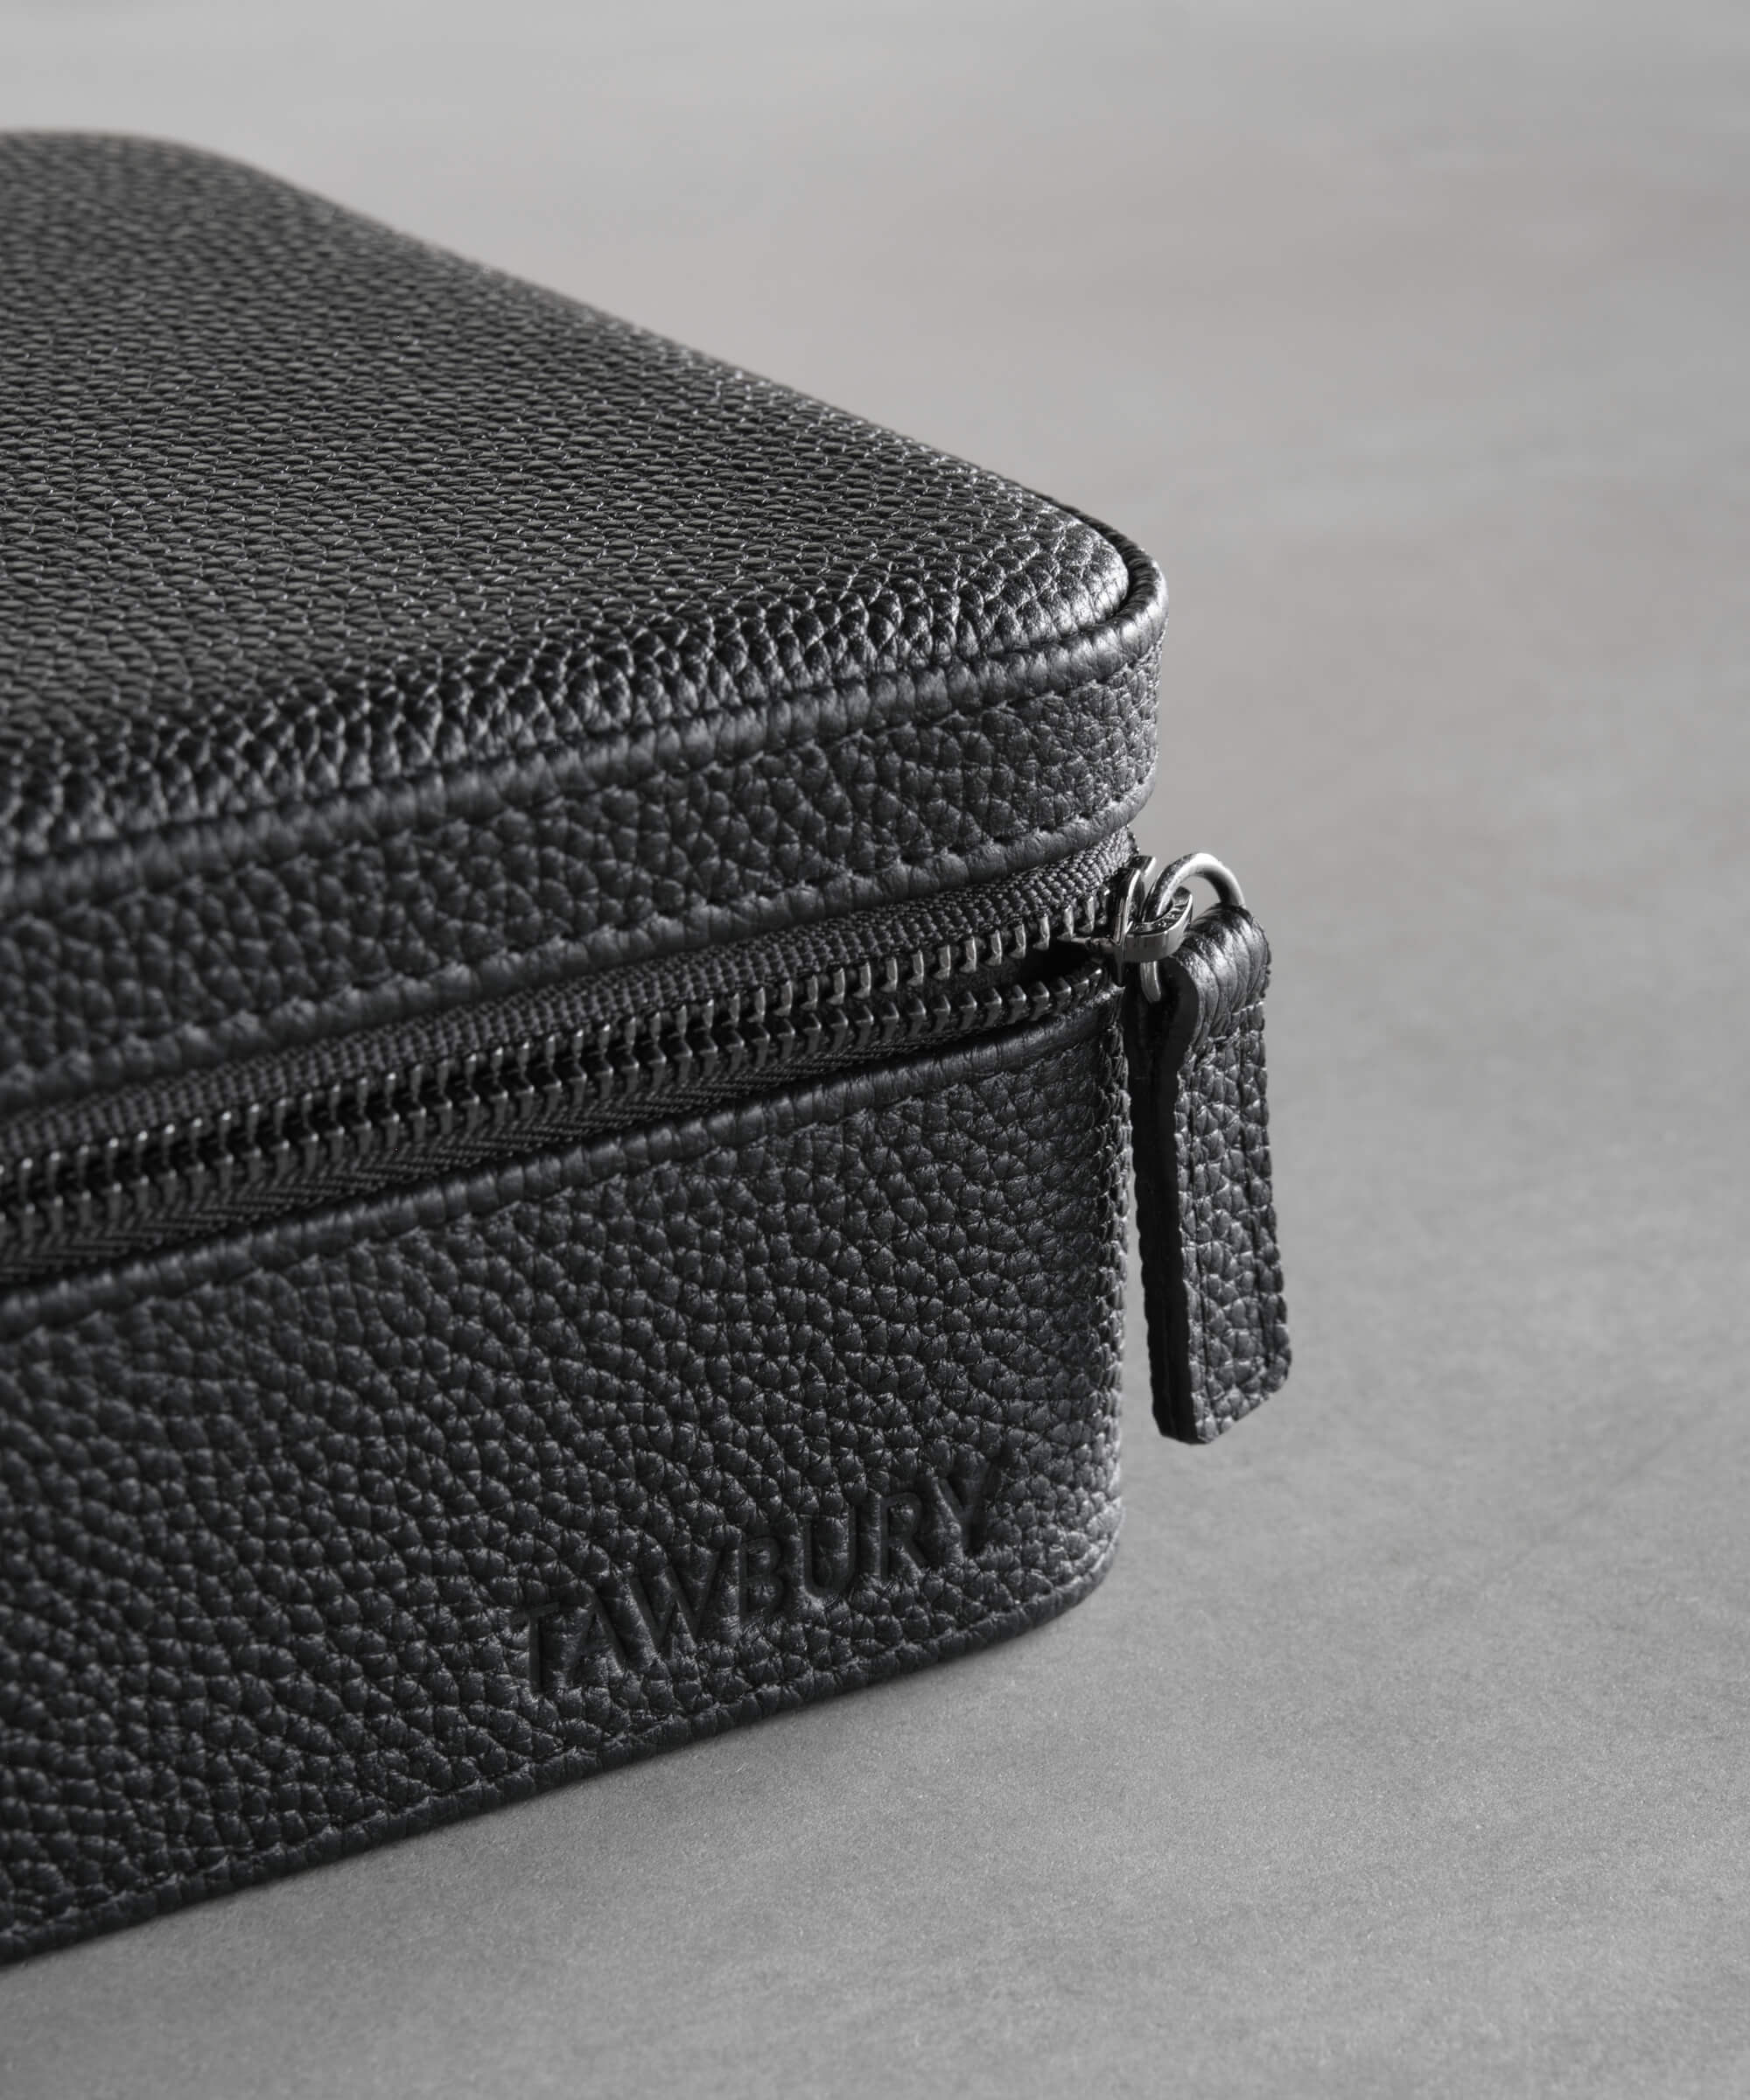 Close-up of a black textured leather case with a visible zipper and the embossed brand name "Tawbury" on the front, part of the luxury TAWBURY range. This Fraser 6 Watch Travel Case - Black (Coming Soon) epitomizes elegance and craftsmanship.